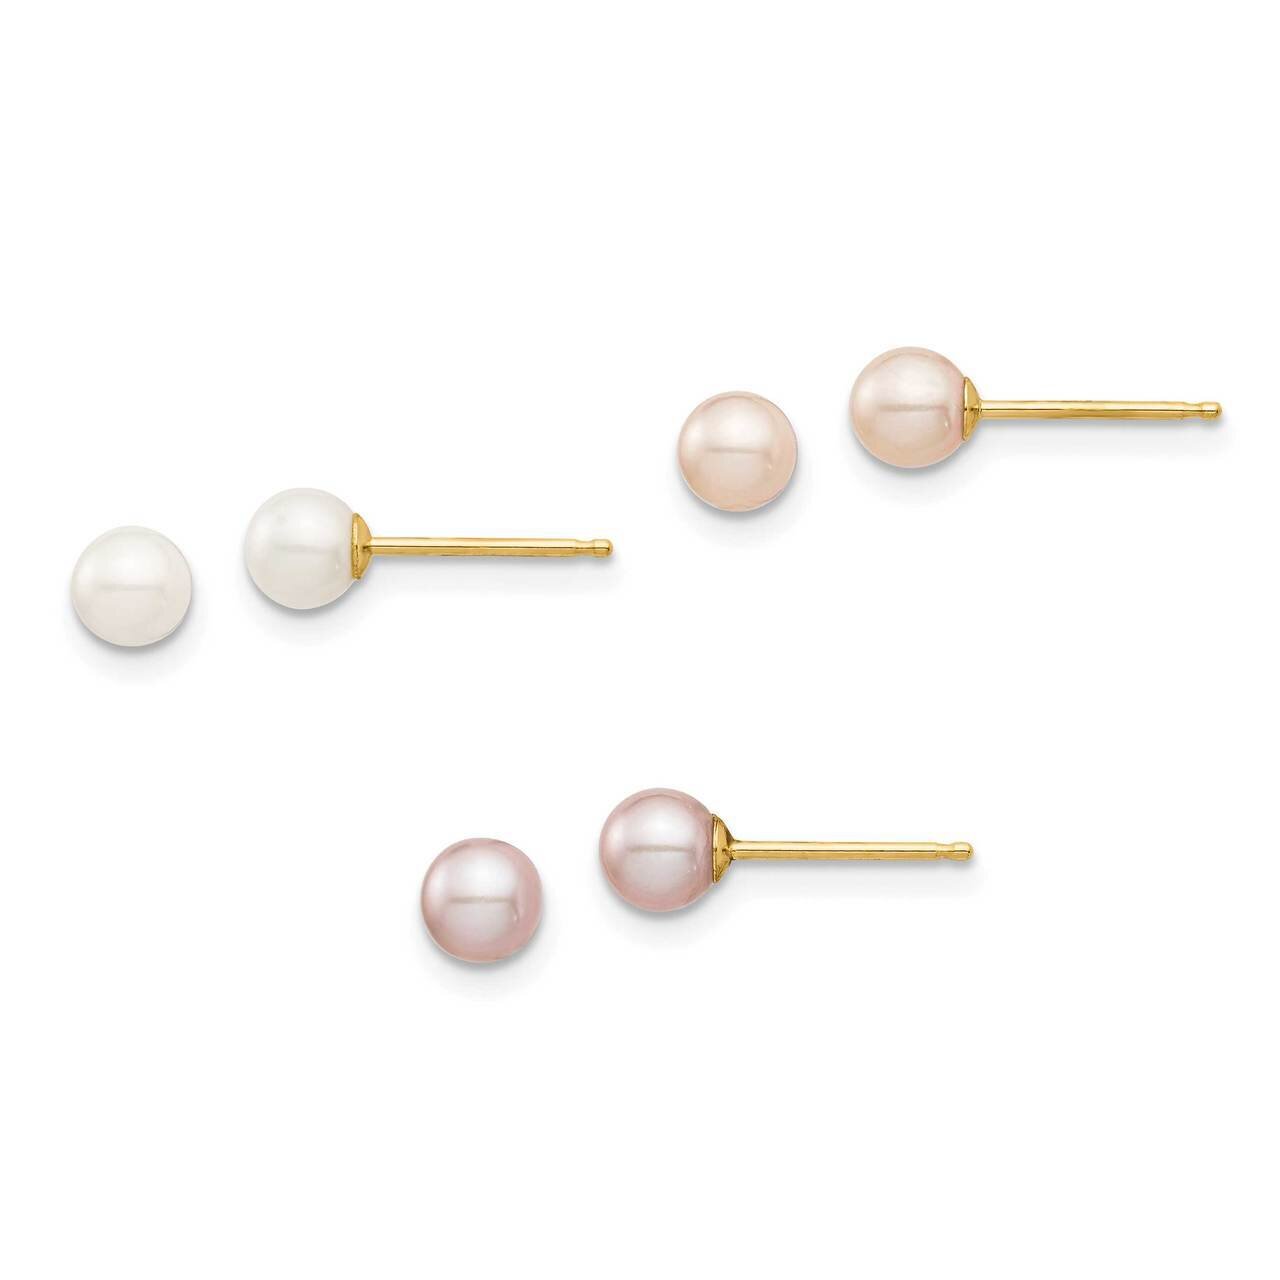 4-5mm White/Pink/Purple Round Freshwater Cultured Pearl Post Earrings Set 14k Gold SE2931